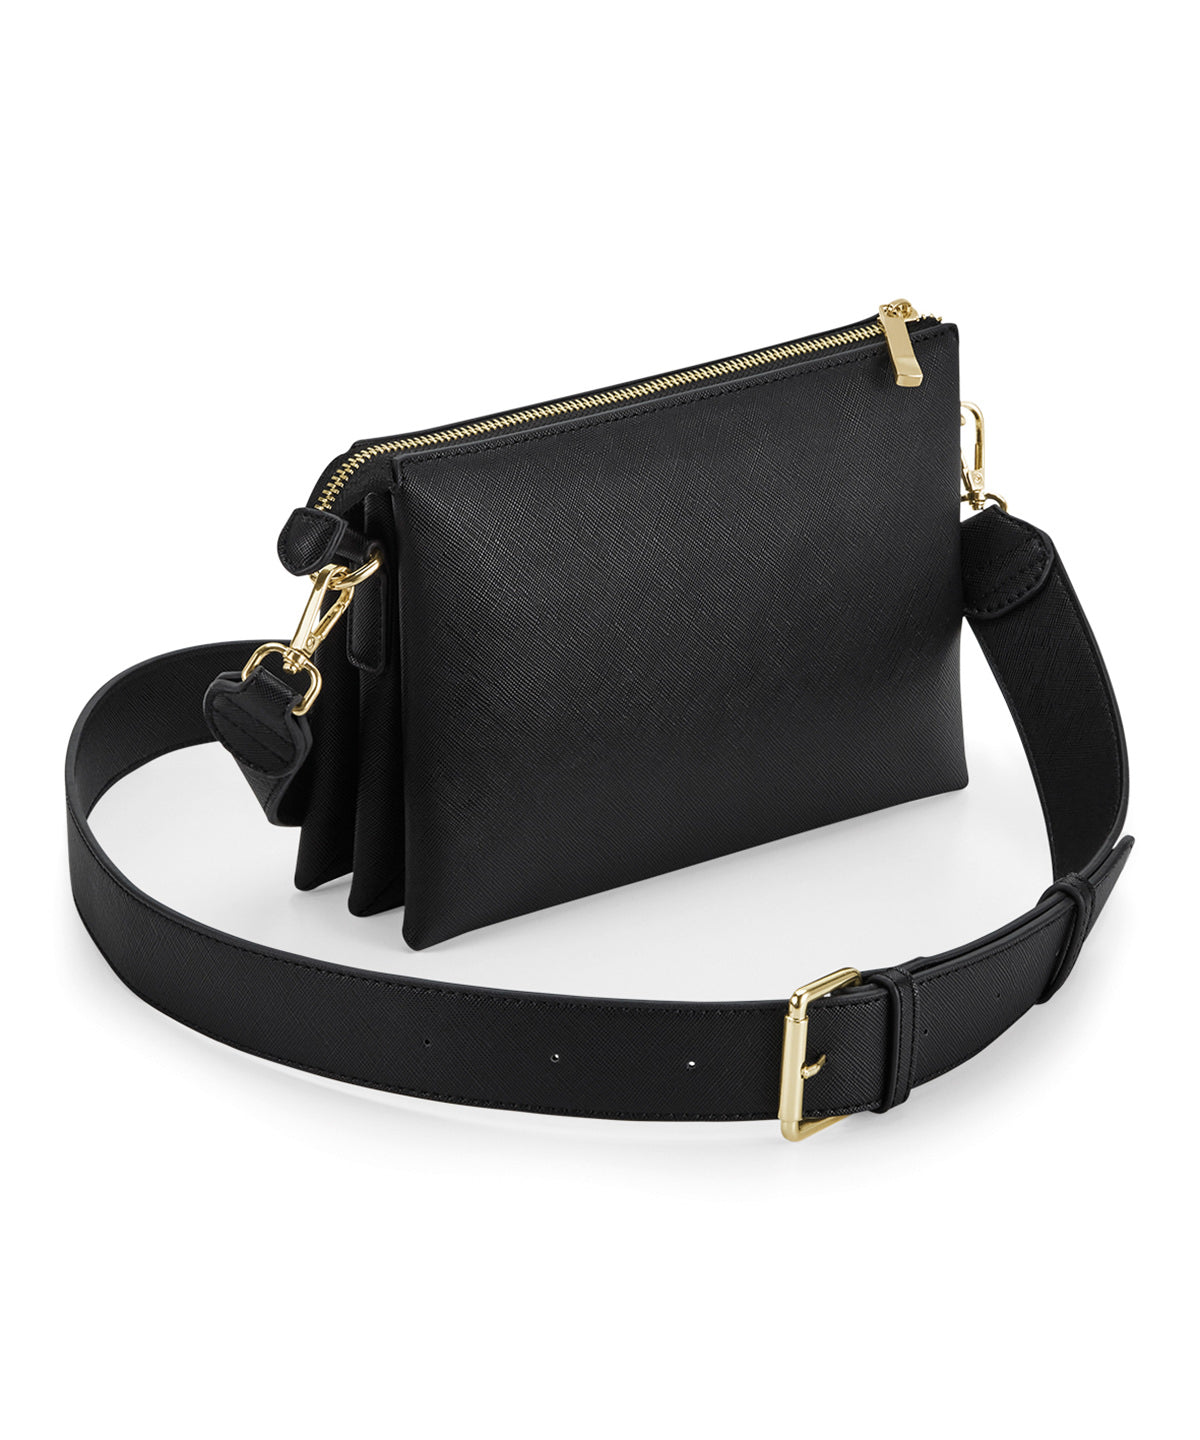 Personalised Bags - Black Bagbase Boutique soft cross-body bag